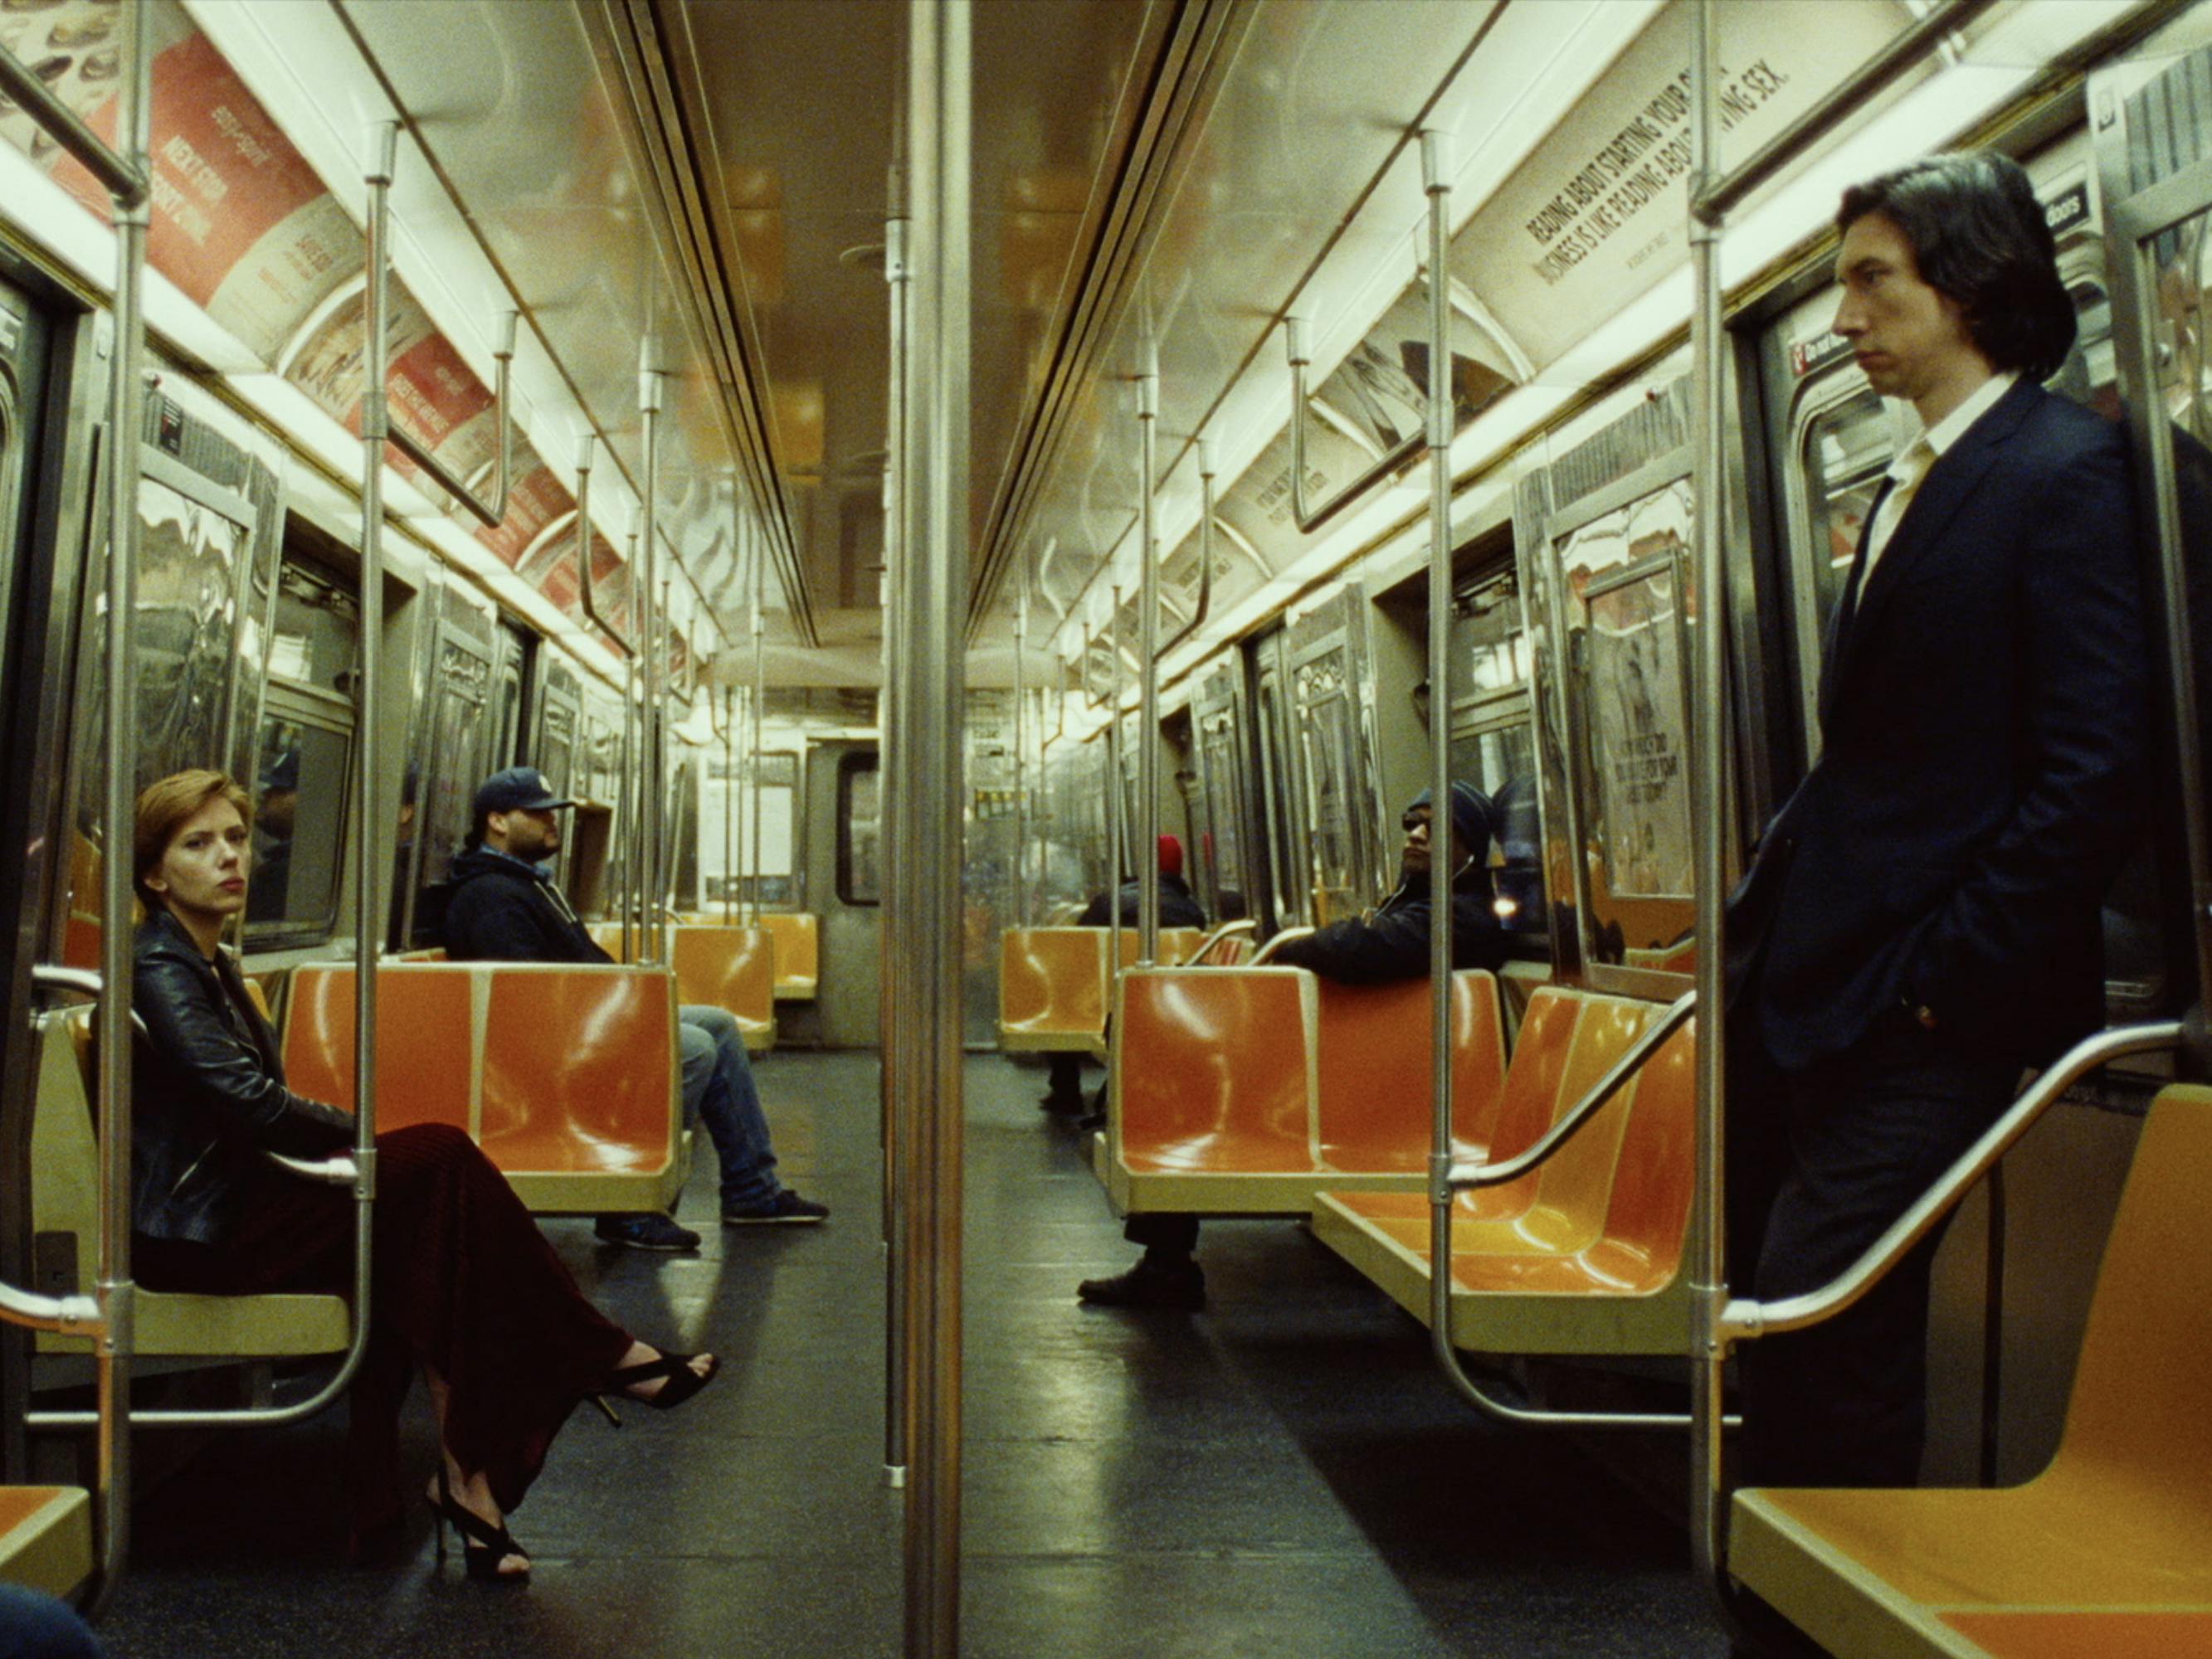 Nicole Barber (Scarlett Johansson) and Charlie Barber (Adam Driver) sit across from each other on the subway.